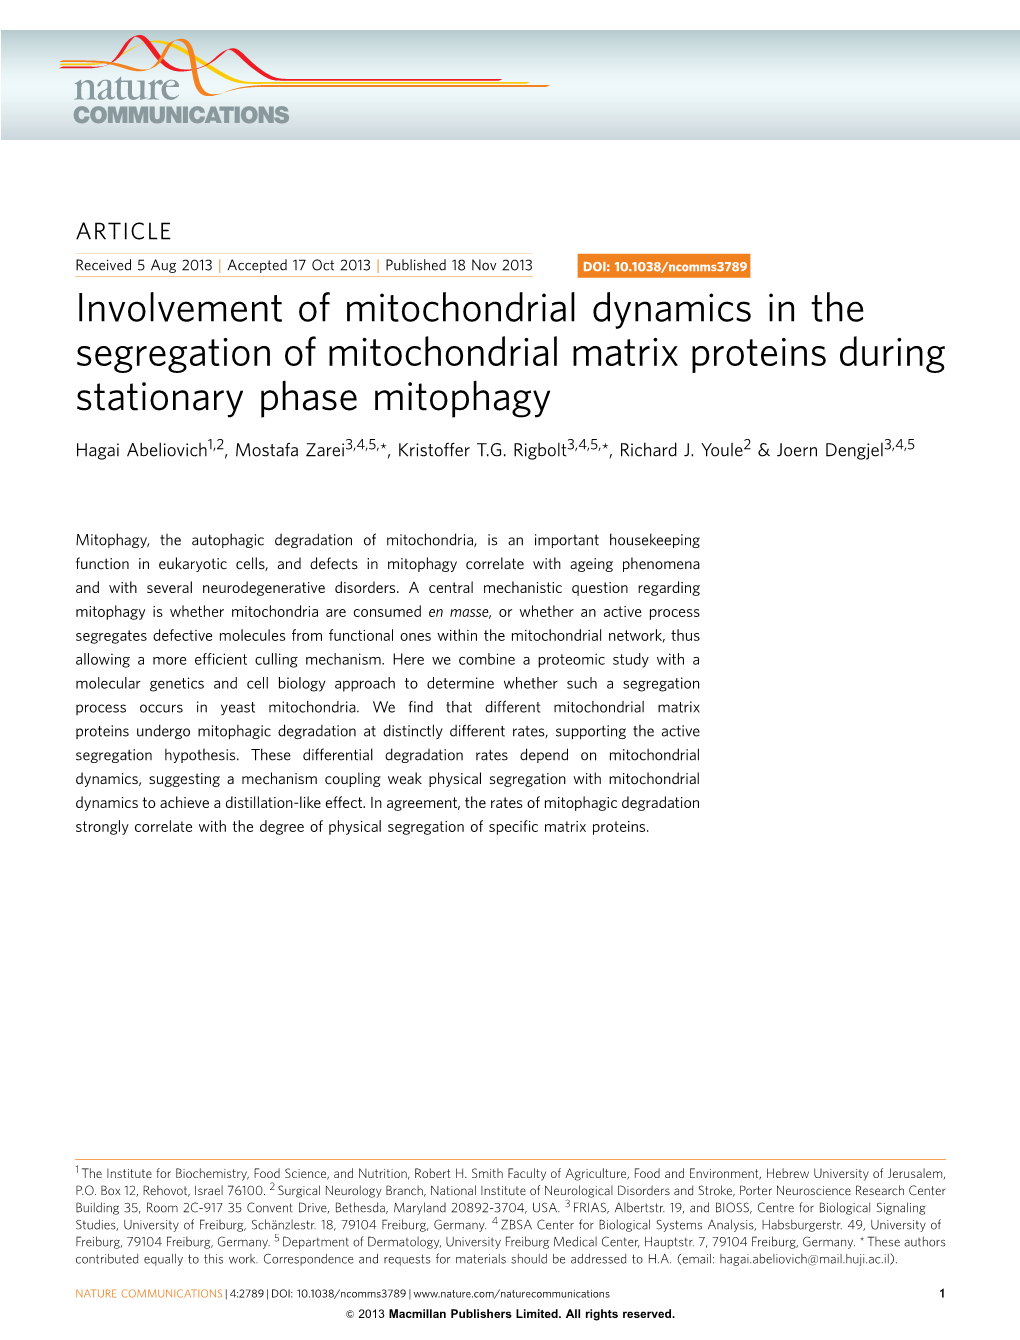 Involvement of Mitochondrial Dynamics in the Segregation of Mitochondrial Matrix Proteins During Stationary Phase Mitophagy